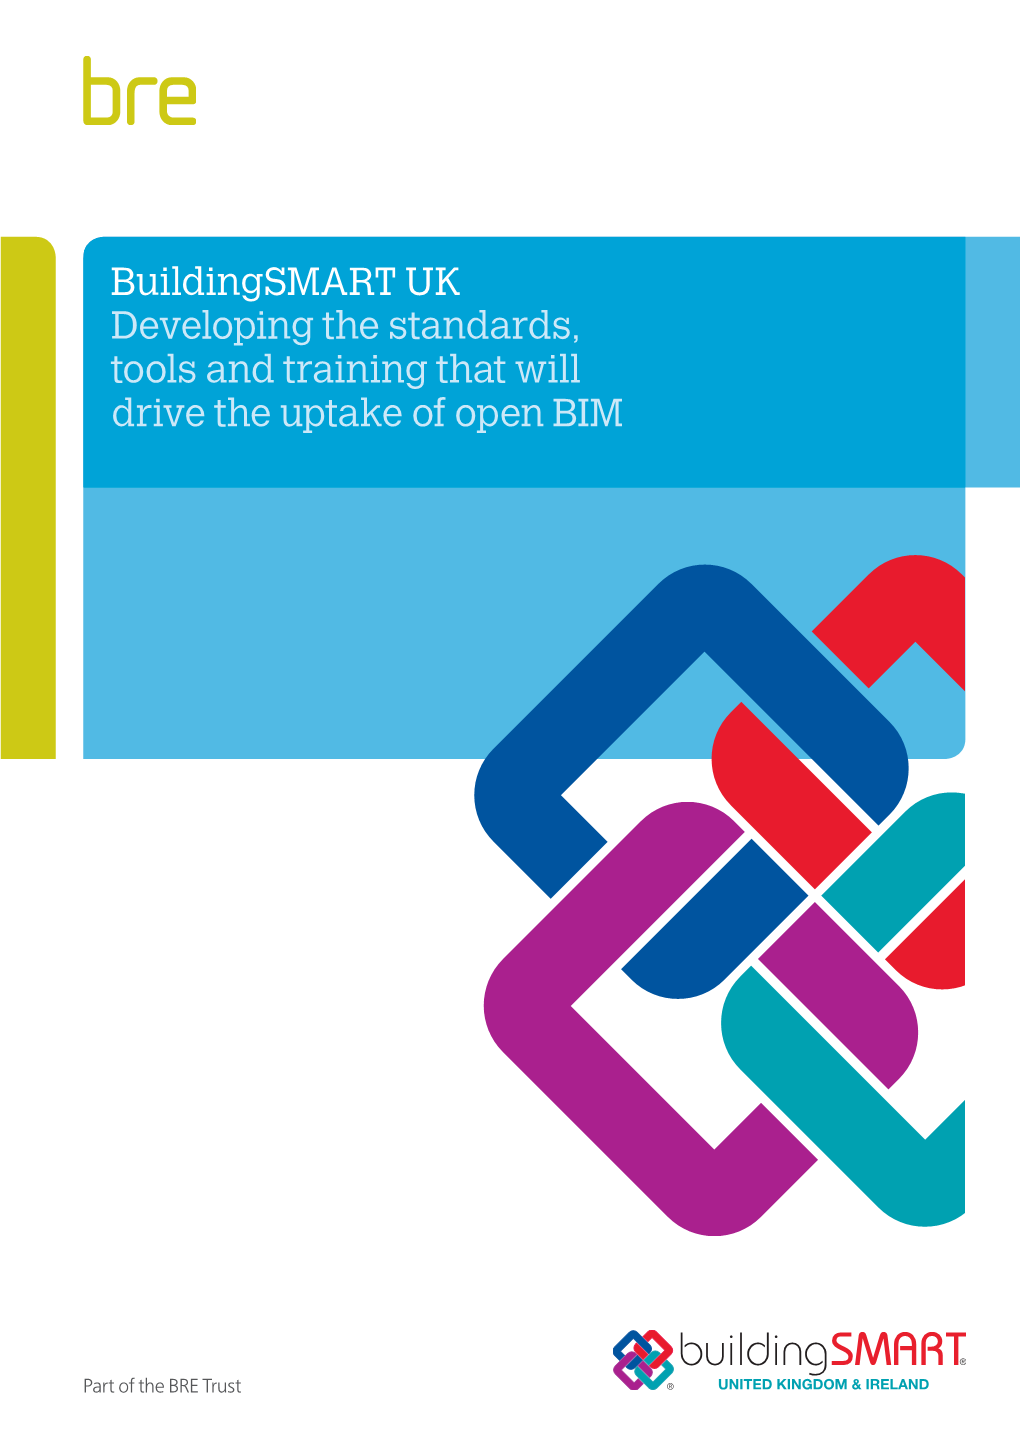 Buildingsmart UK Developing the Standards, Tools and Training That Will Drive the Uptake of Open BIM